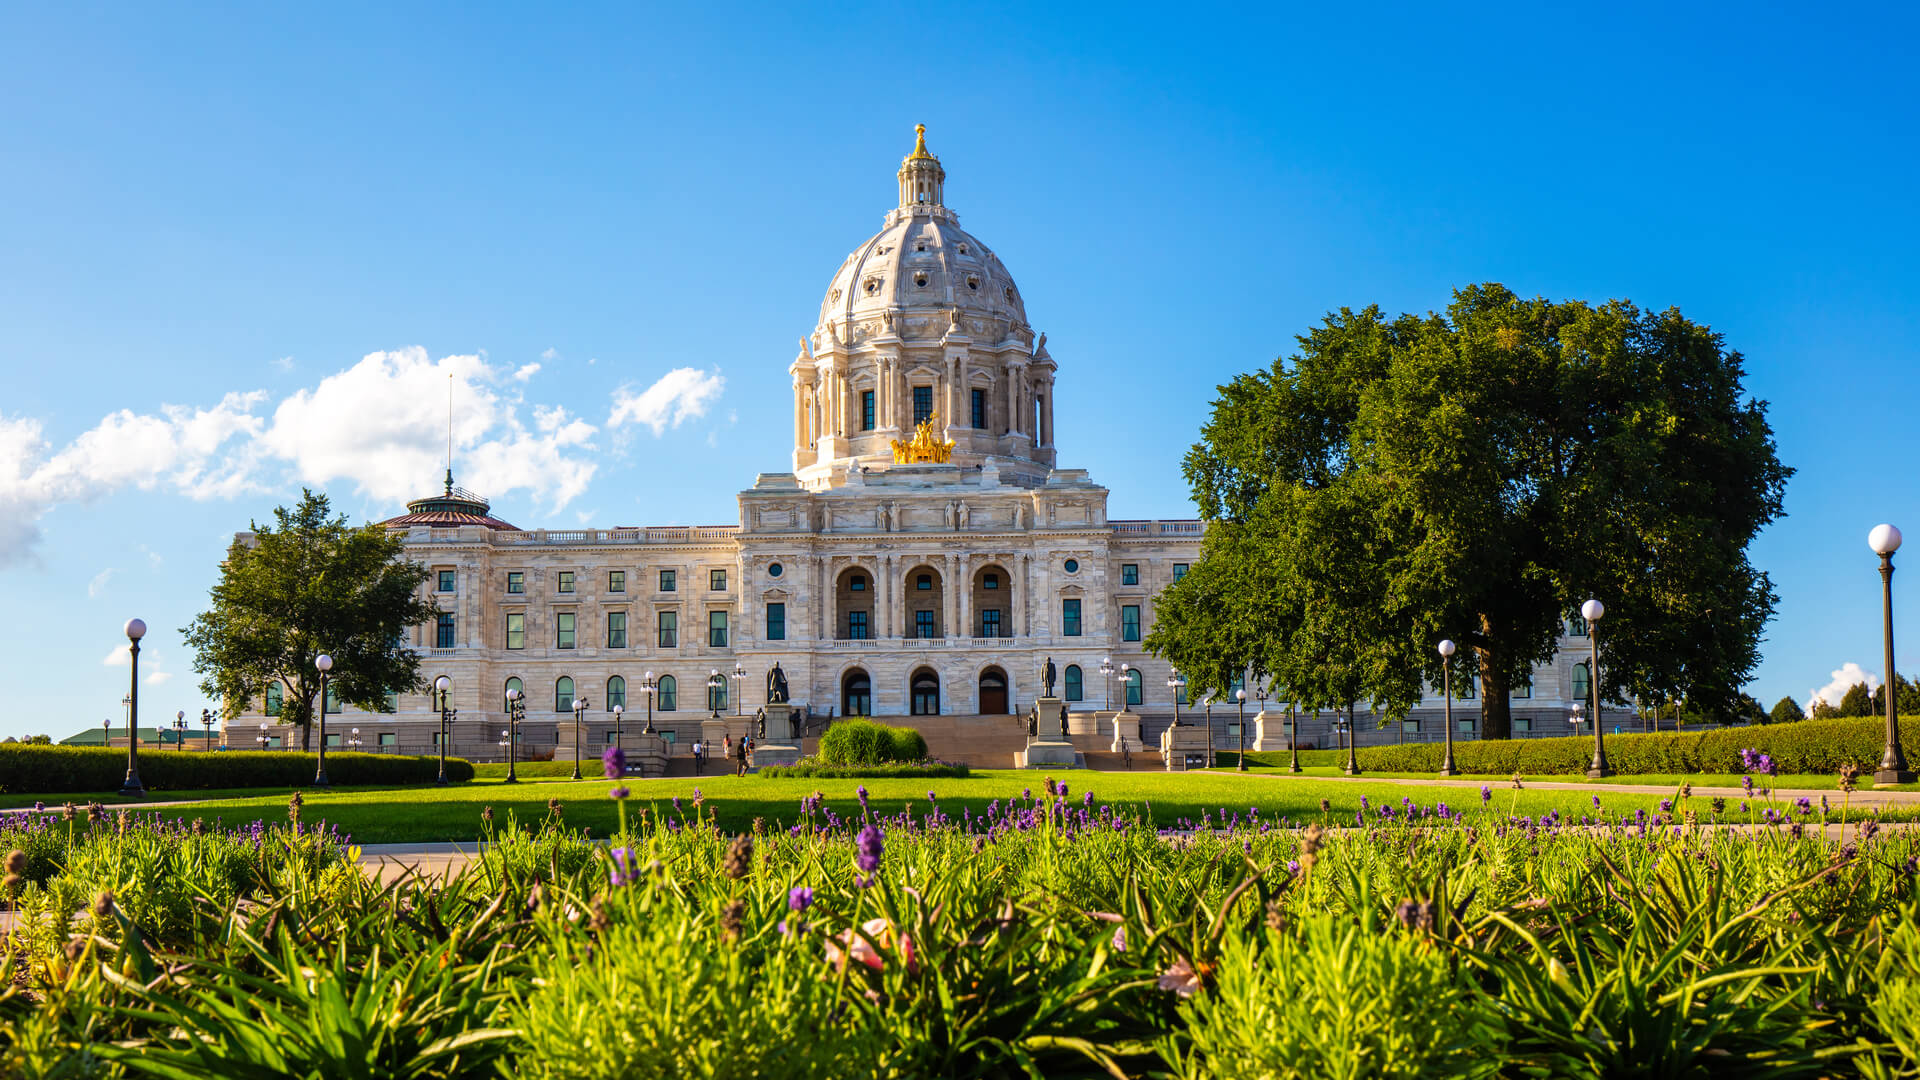 The Minnesota State Capitol Building in Saint Paul, USA